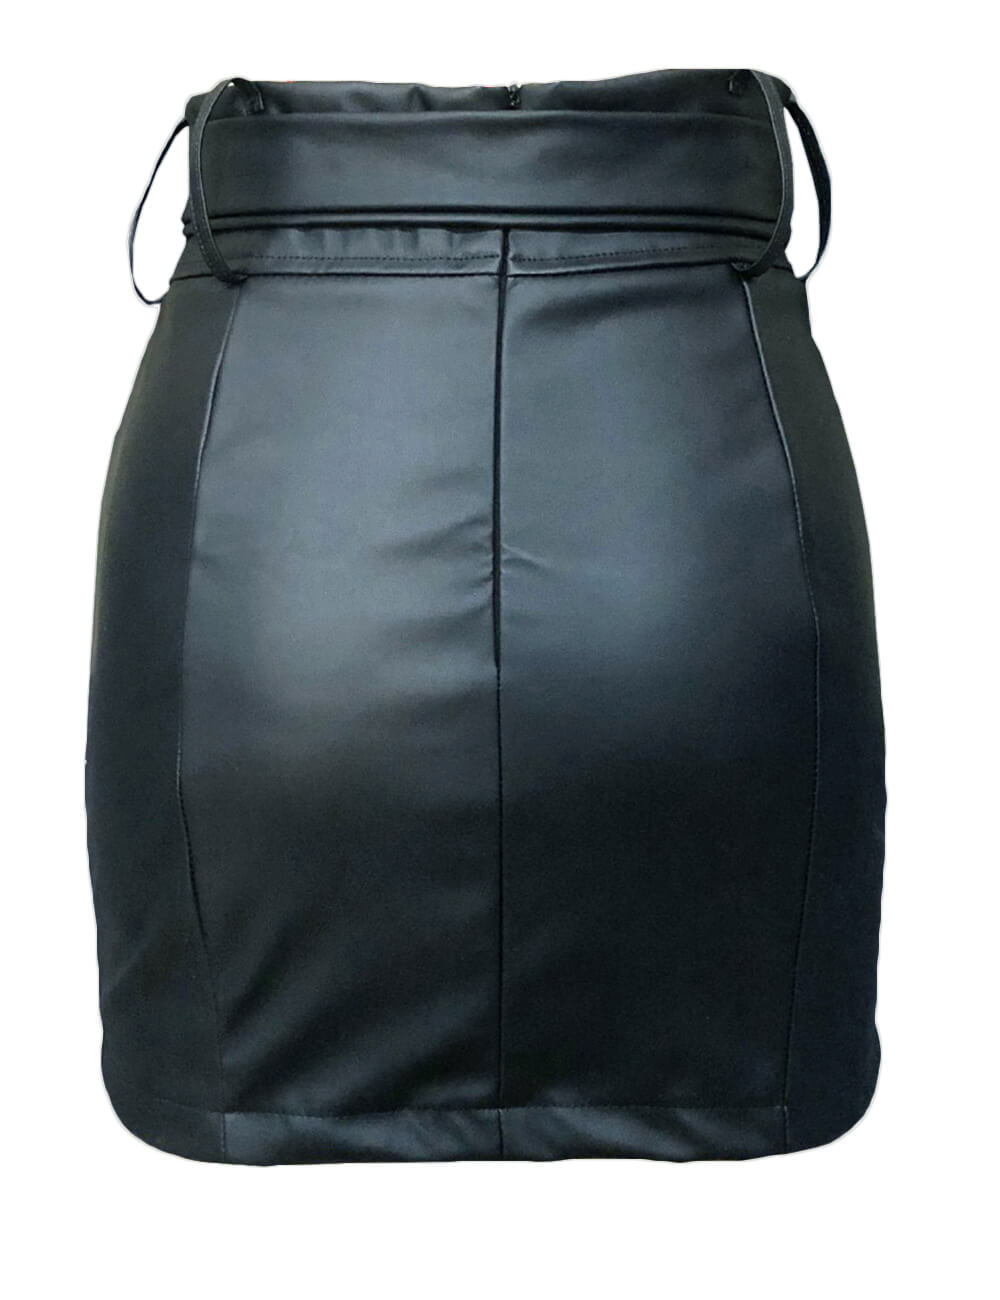 High Waisted PU Mini Skirt Side Split Faux Leather Pencil Skirts With Tie Belt